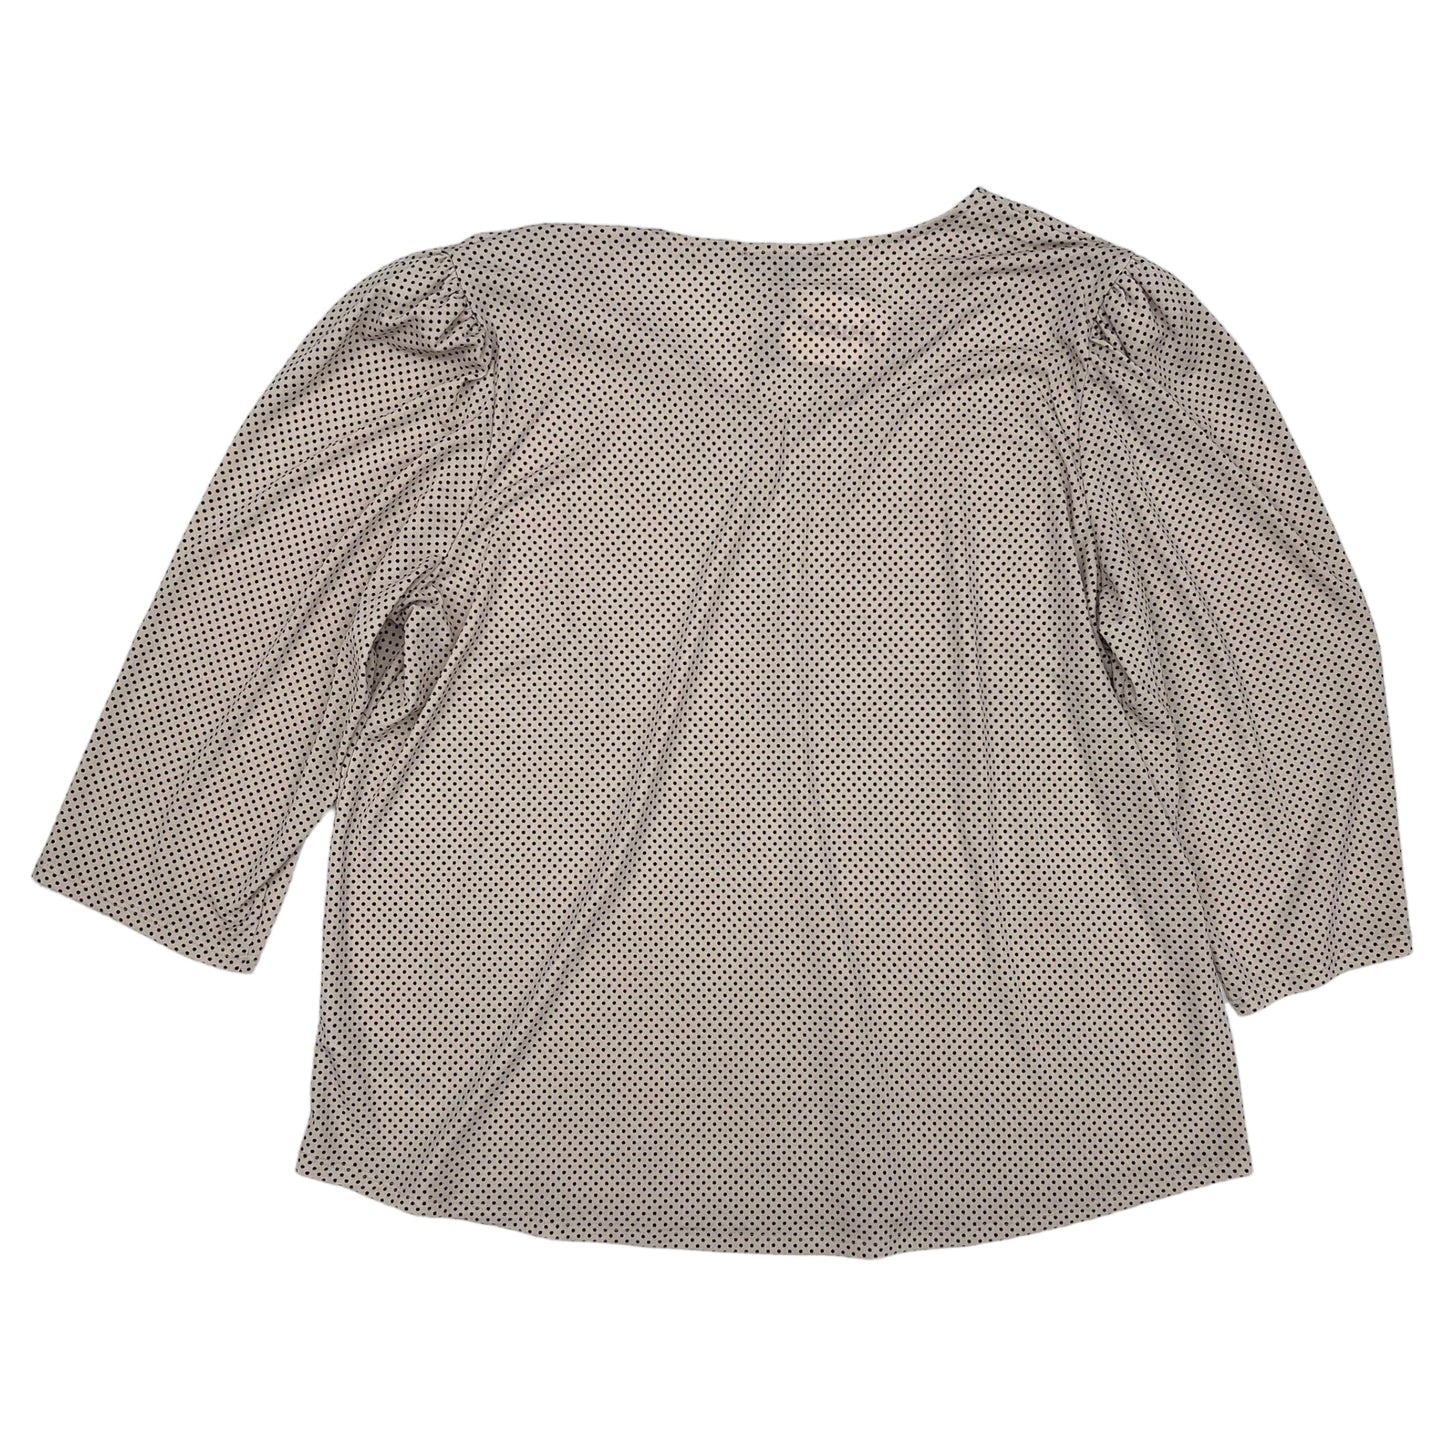 Top Long Sleeve By Adrianna Papell  Size: 1x